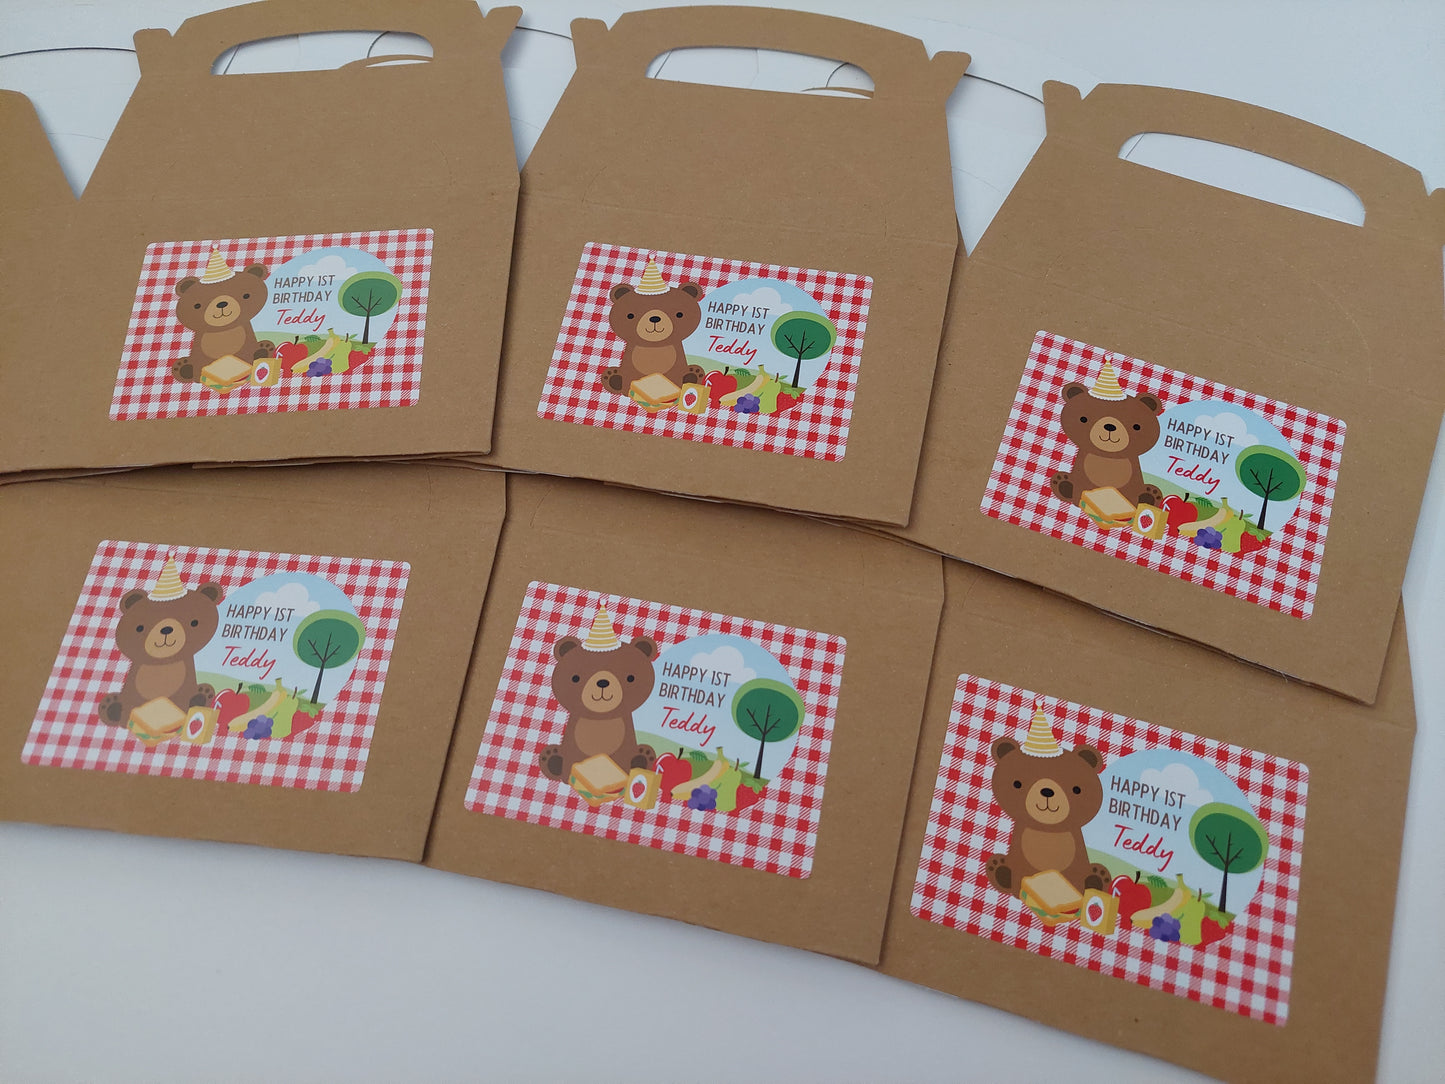 Party Boxes | Teddy Bear Picnic Party Boxes | Teddy Bear Picnic Party | Teddy Bear Party Decor | Party Bags